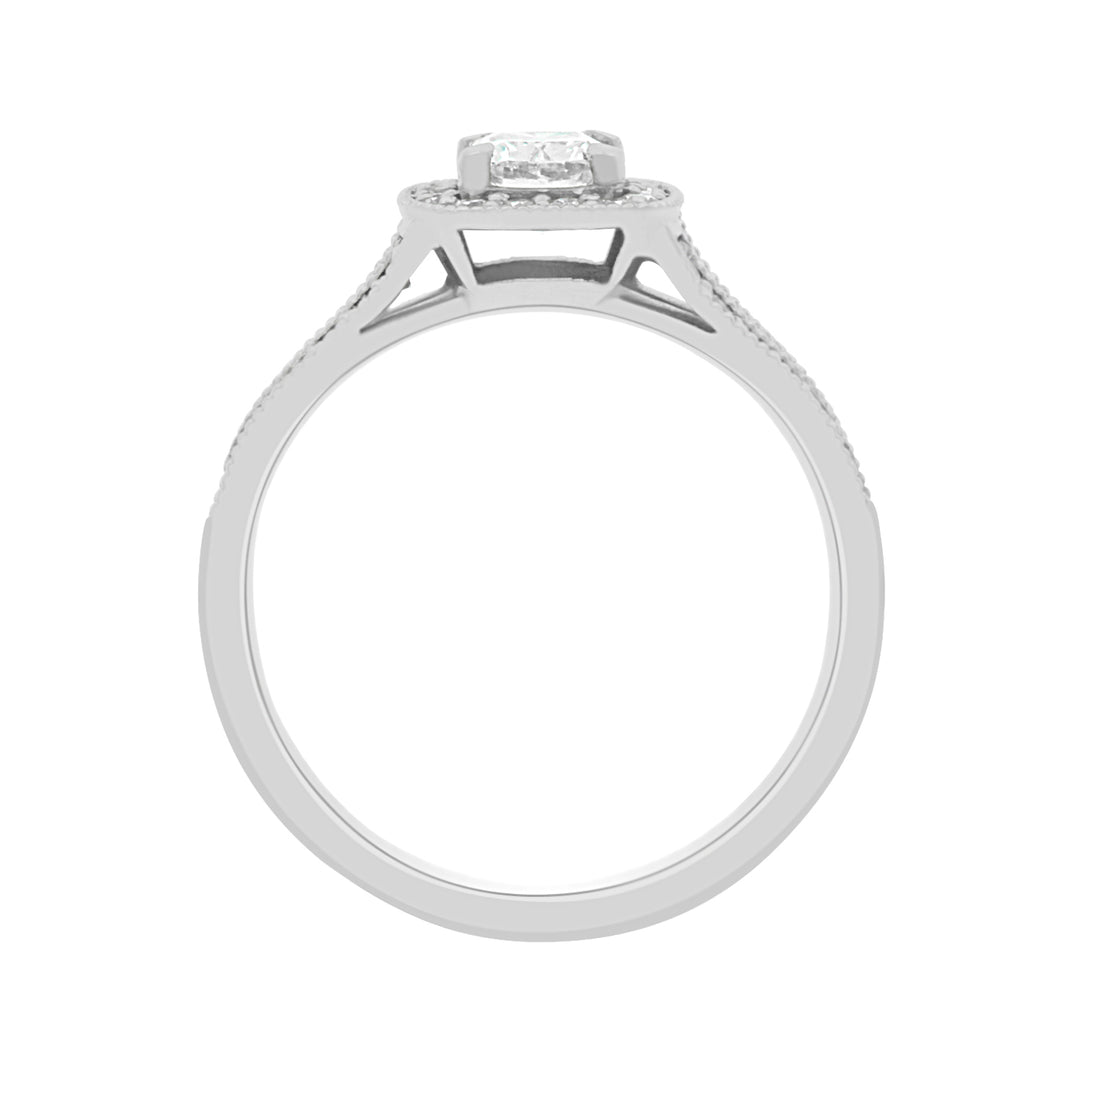 Cushion Halo Diamond Ring in white gold in an upright position